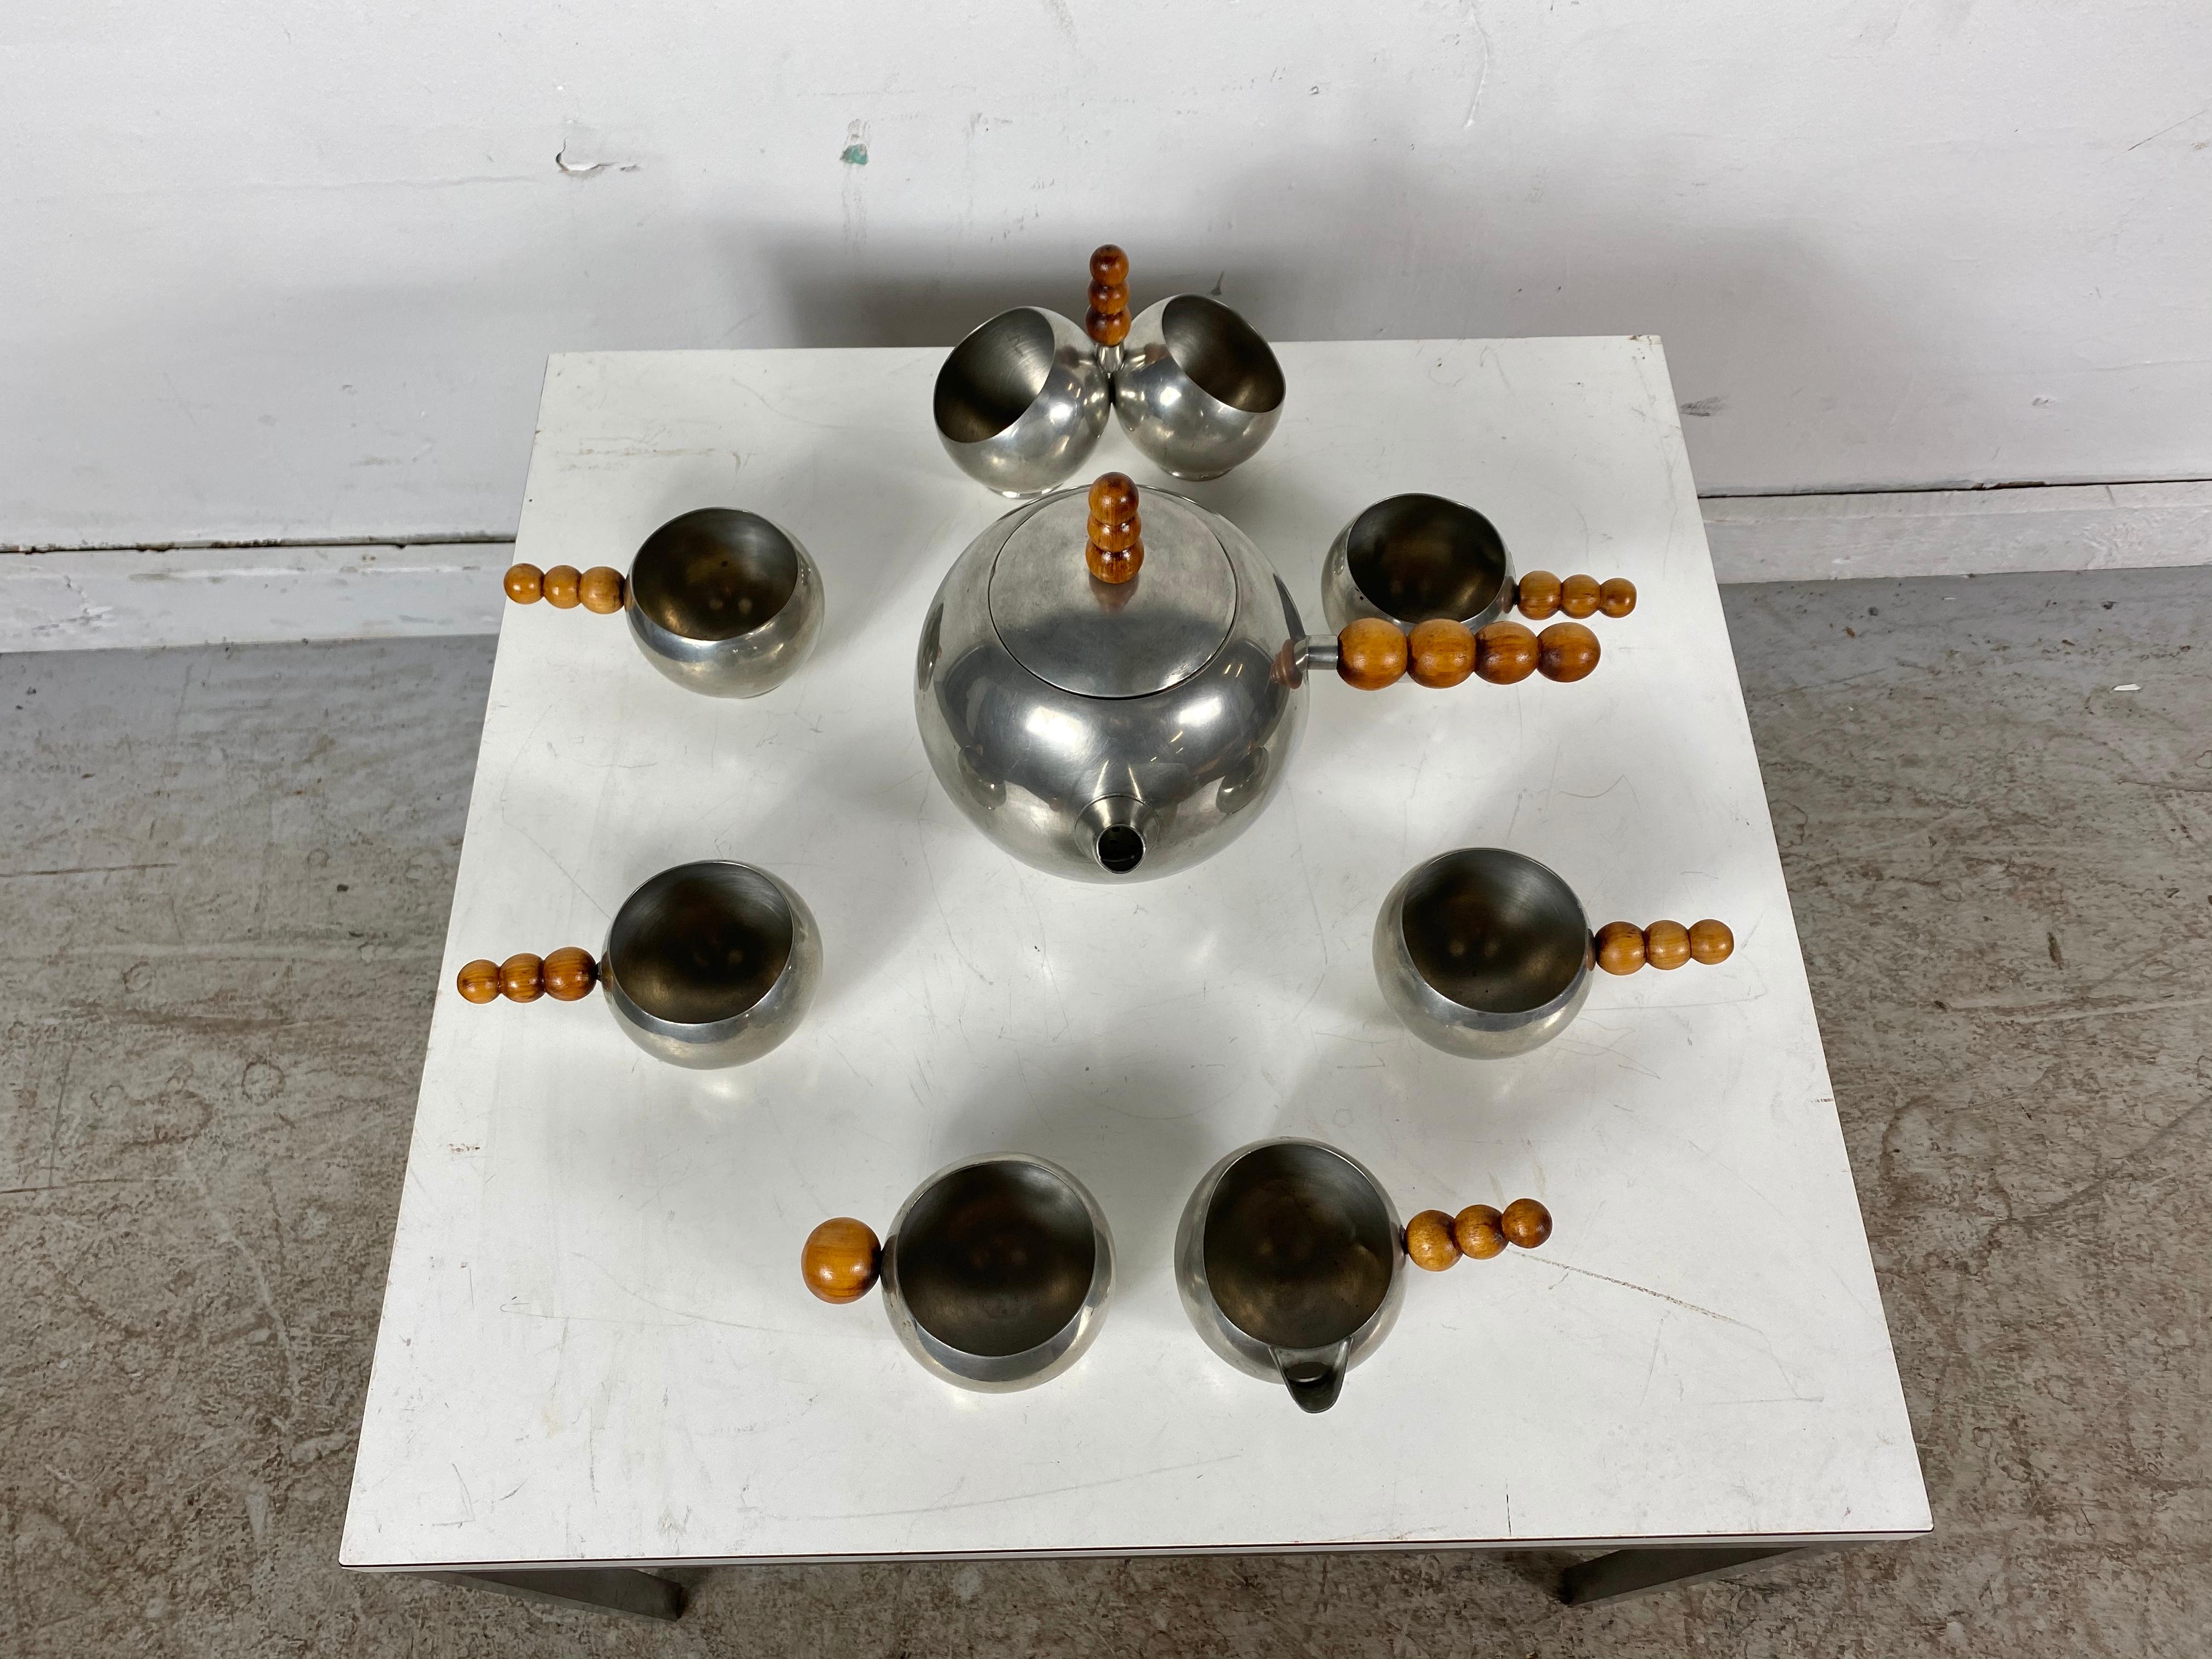 Unusual Art Deco, modernist 8-piece tea set, chrome or wood ball design. Unsigned, stunning modern design, consisting of teapot, creamer and sugar, 4 cups and relish container.